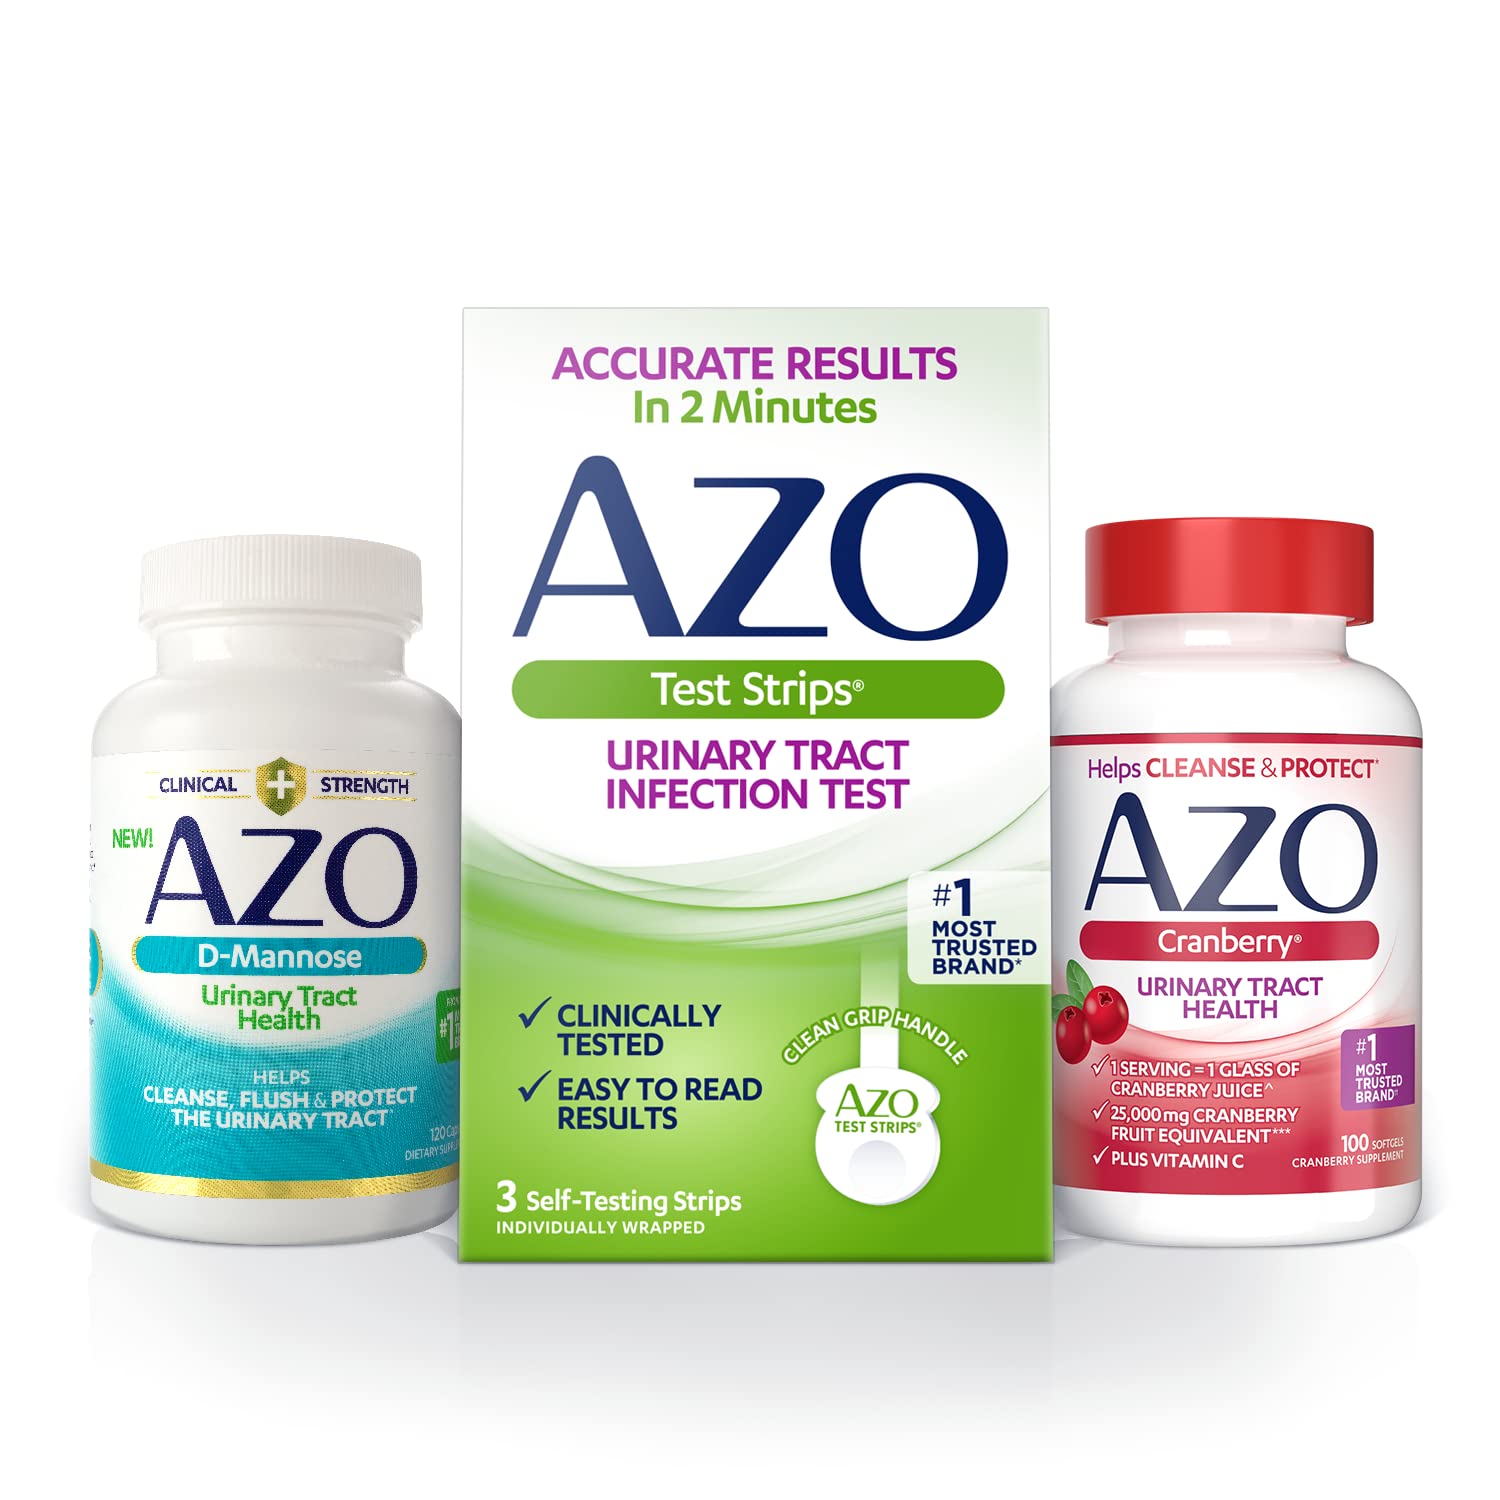 AZO Cranberry Softgels (100 Count) +Urinary Tract Infection (UTI) Test Strips (3 Count) + D-Mannose for Urinary Tract Health (120 Count)